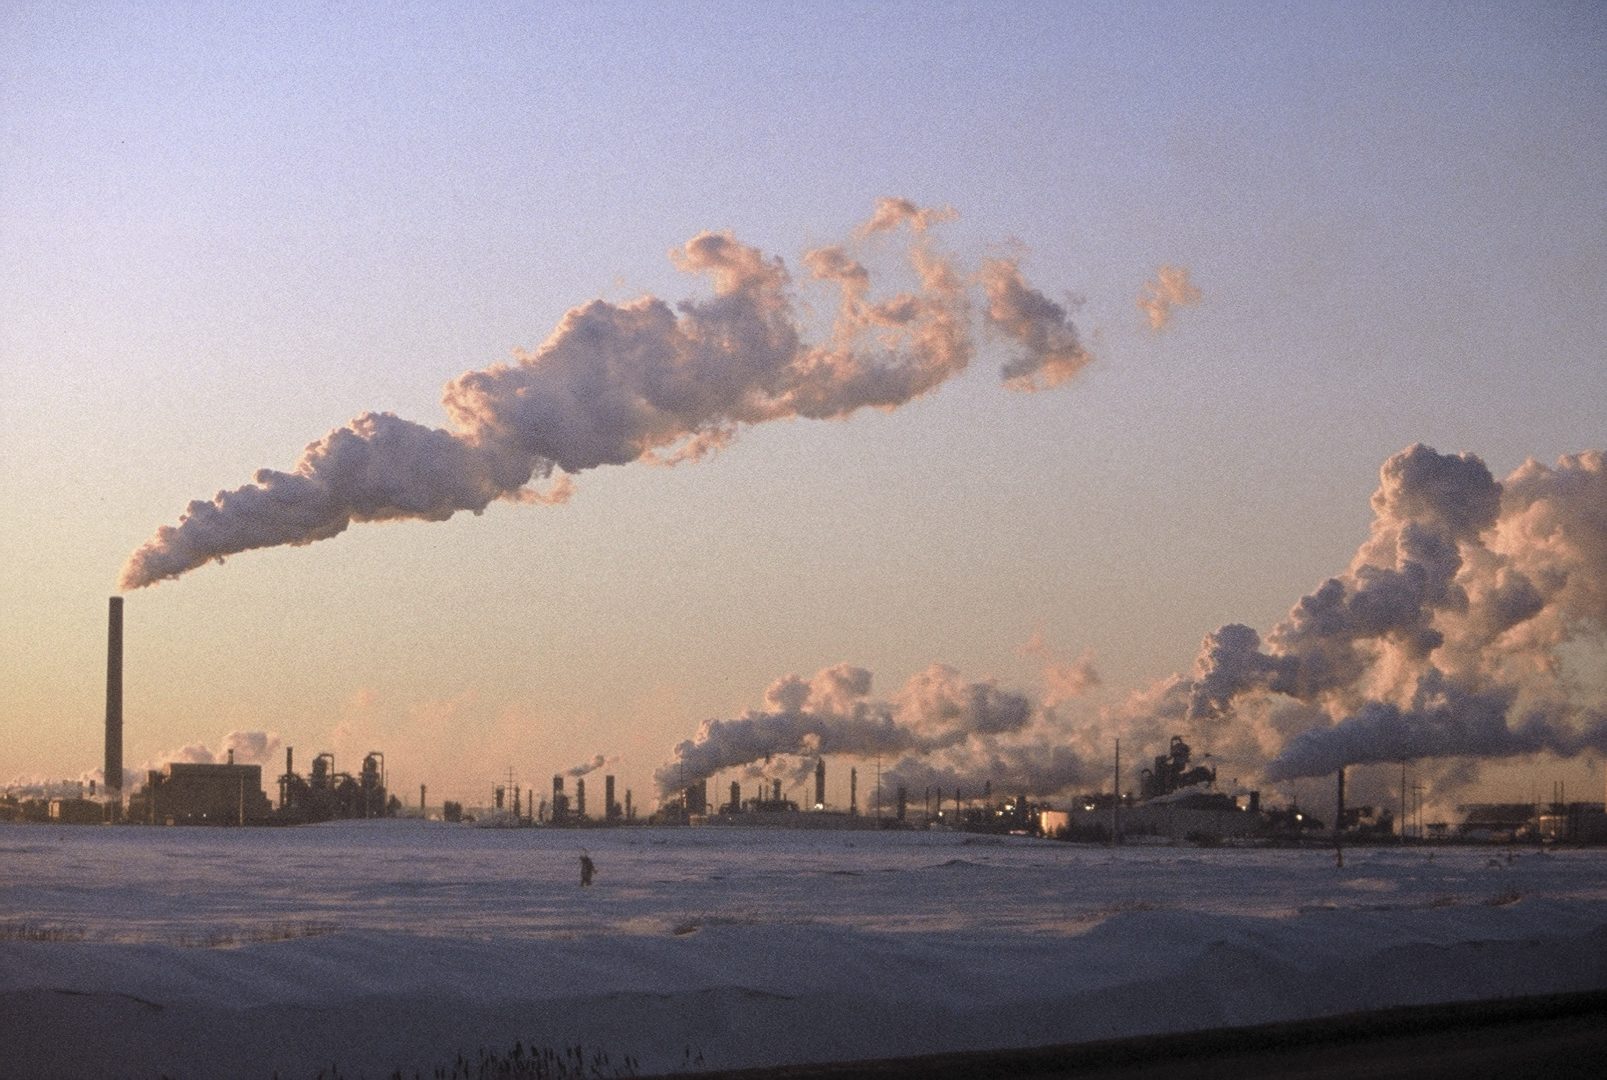 An industrial complex with many smoke stacks in the winter. Smoke rises from the stacks pouring into the sky.